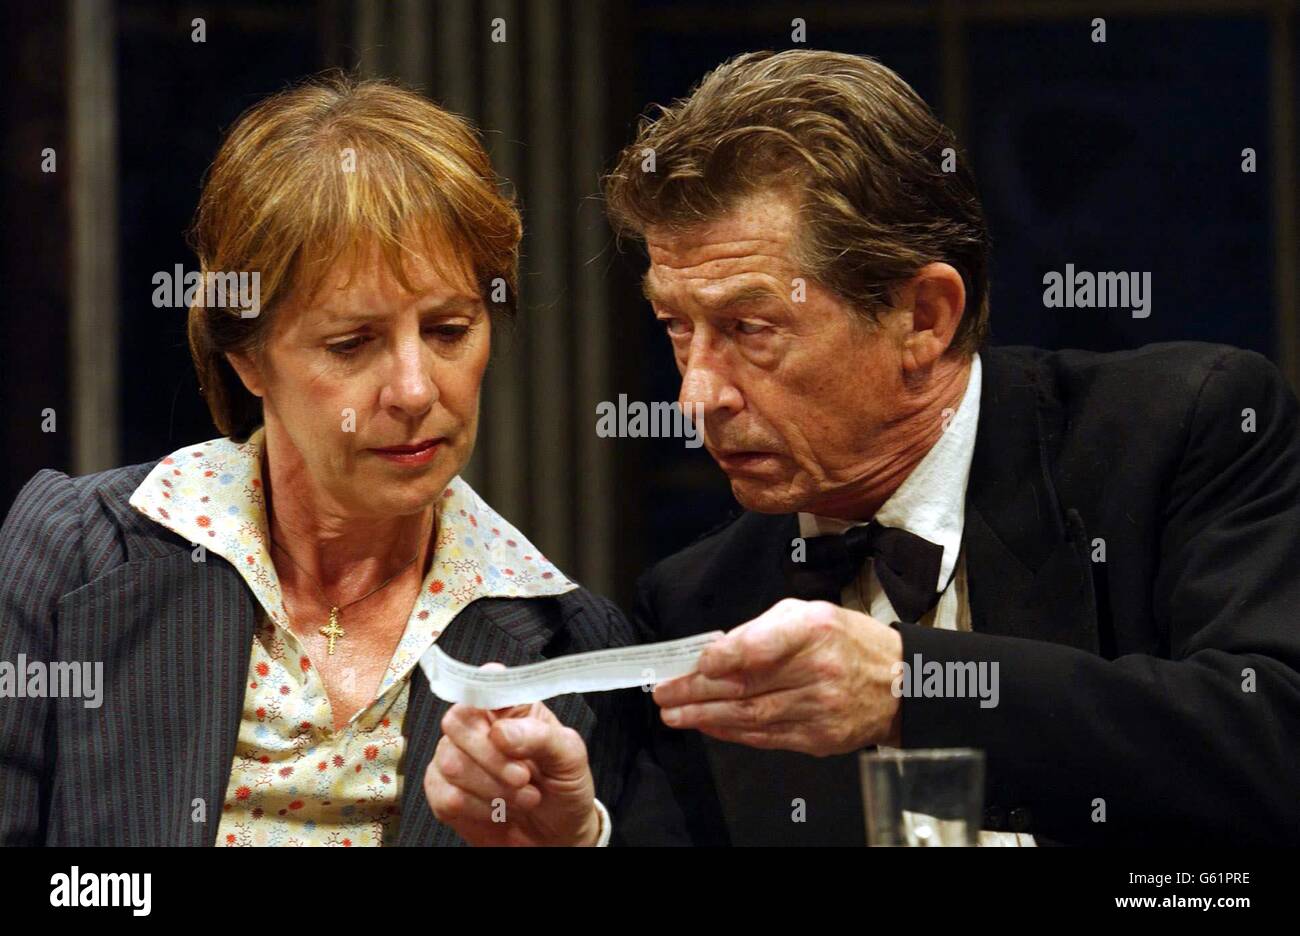 Actors John Hurt and Penelope Wilton during a photocall for their play 'Afterplay' at the Gielgud Theatre on Shaftbury Avenue in London. The play written by Brian Friel open on Thursday 19 September. Stock Photo